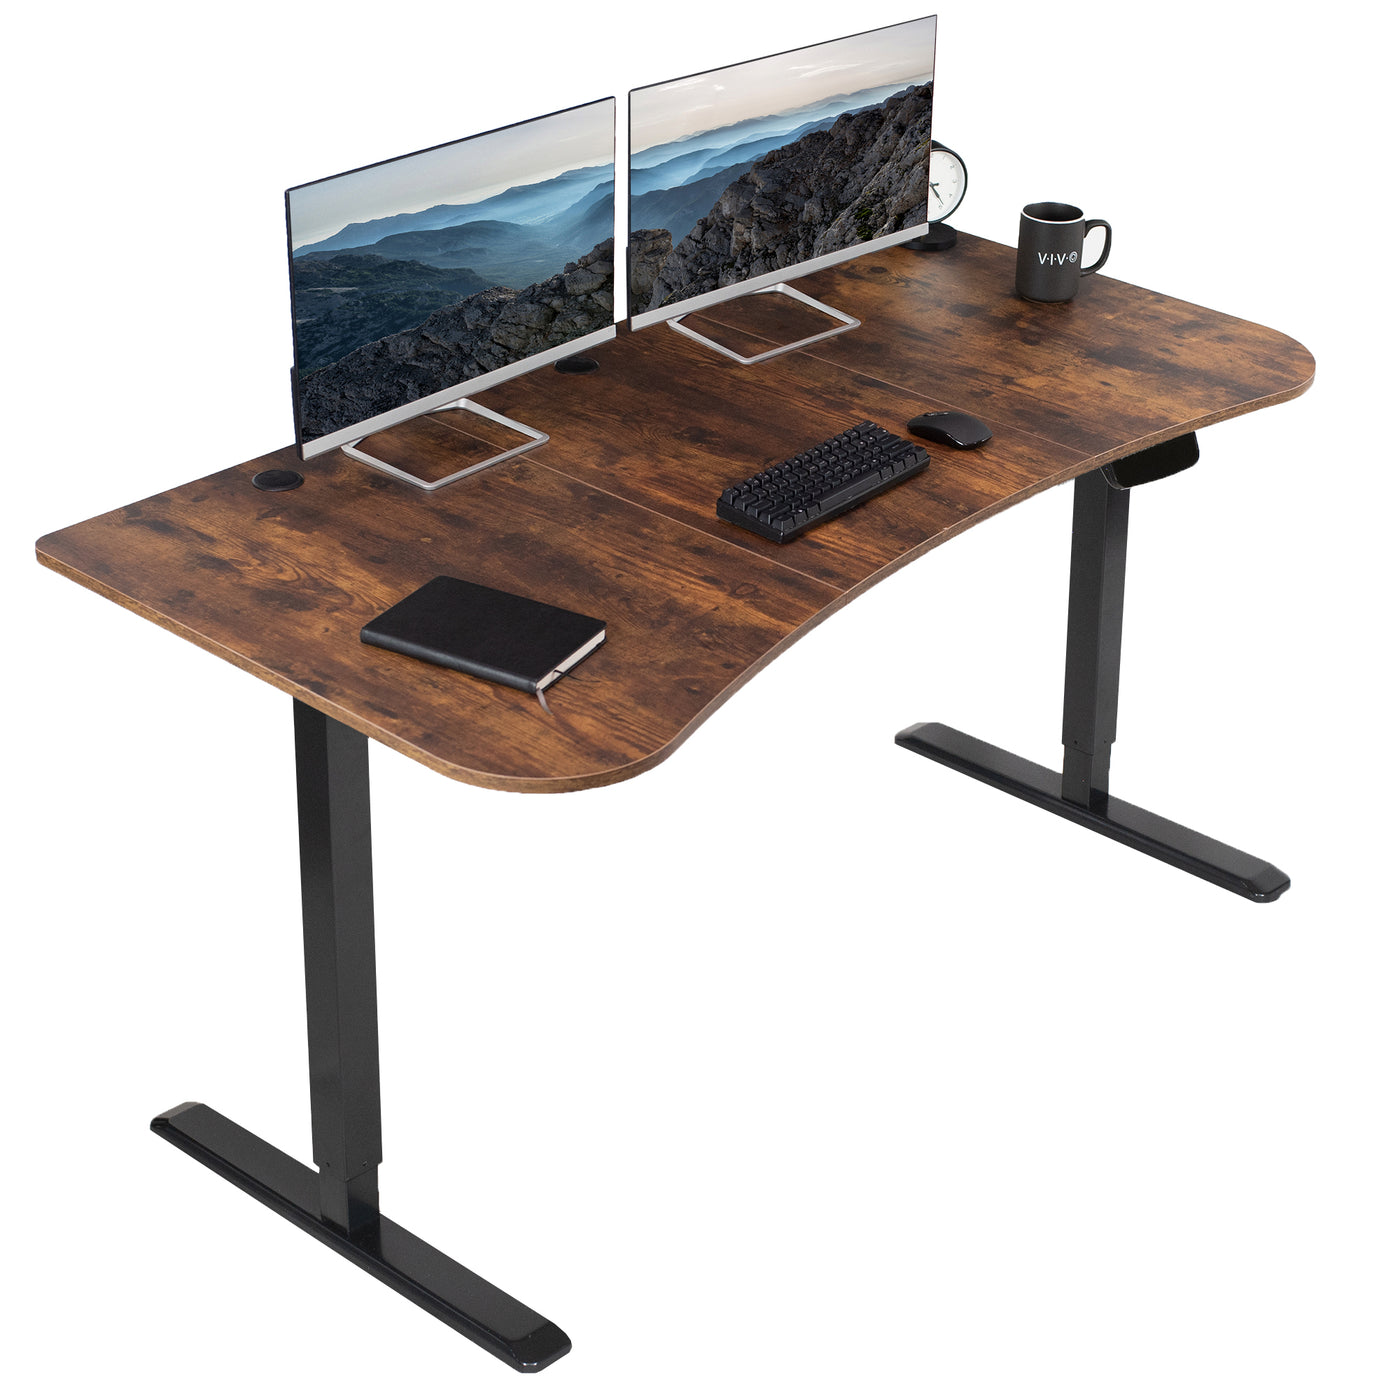 Rustic ergonomic sit or stand active workstation with adjustable height using touch screen control panel.